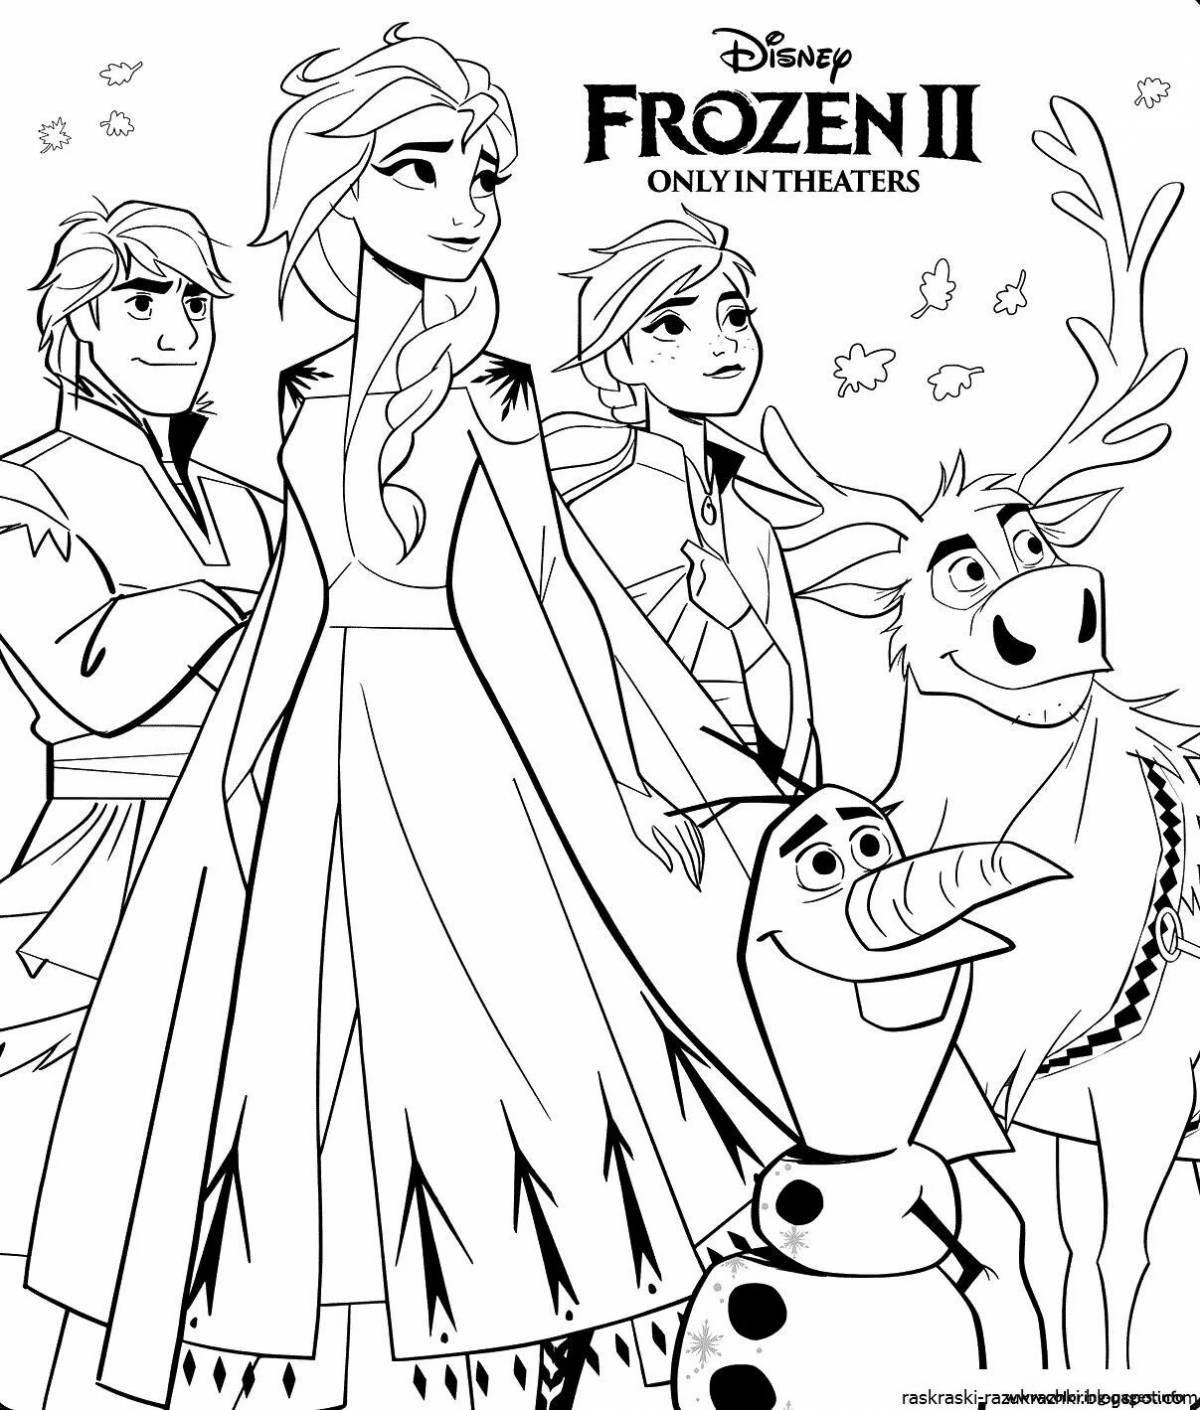 Elsa's awesome coloring book